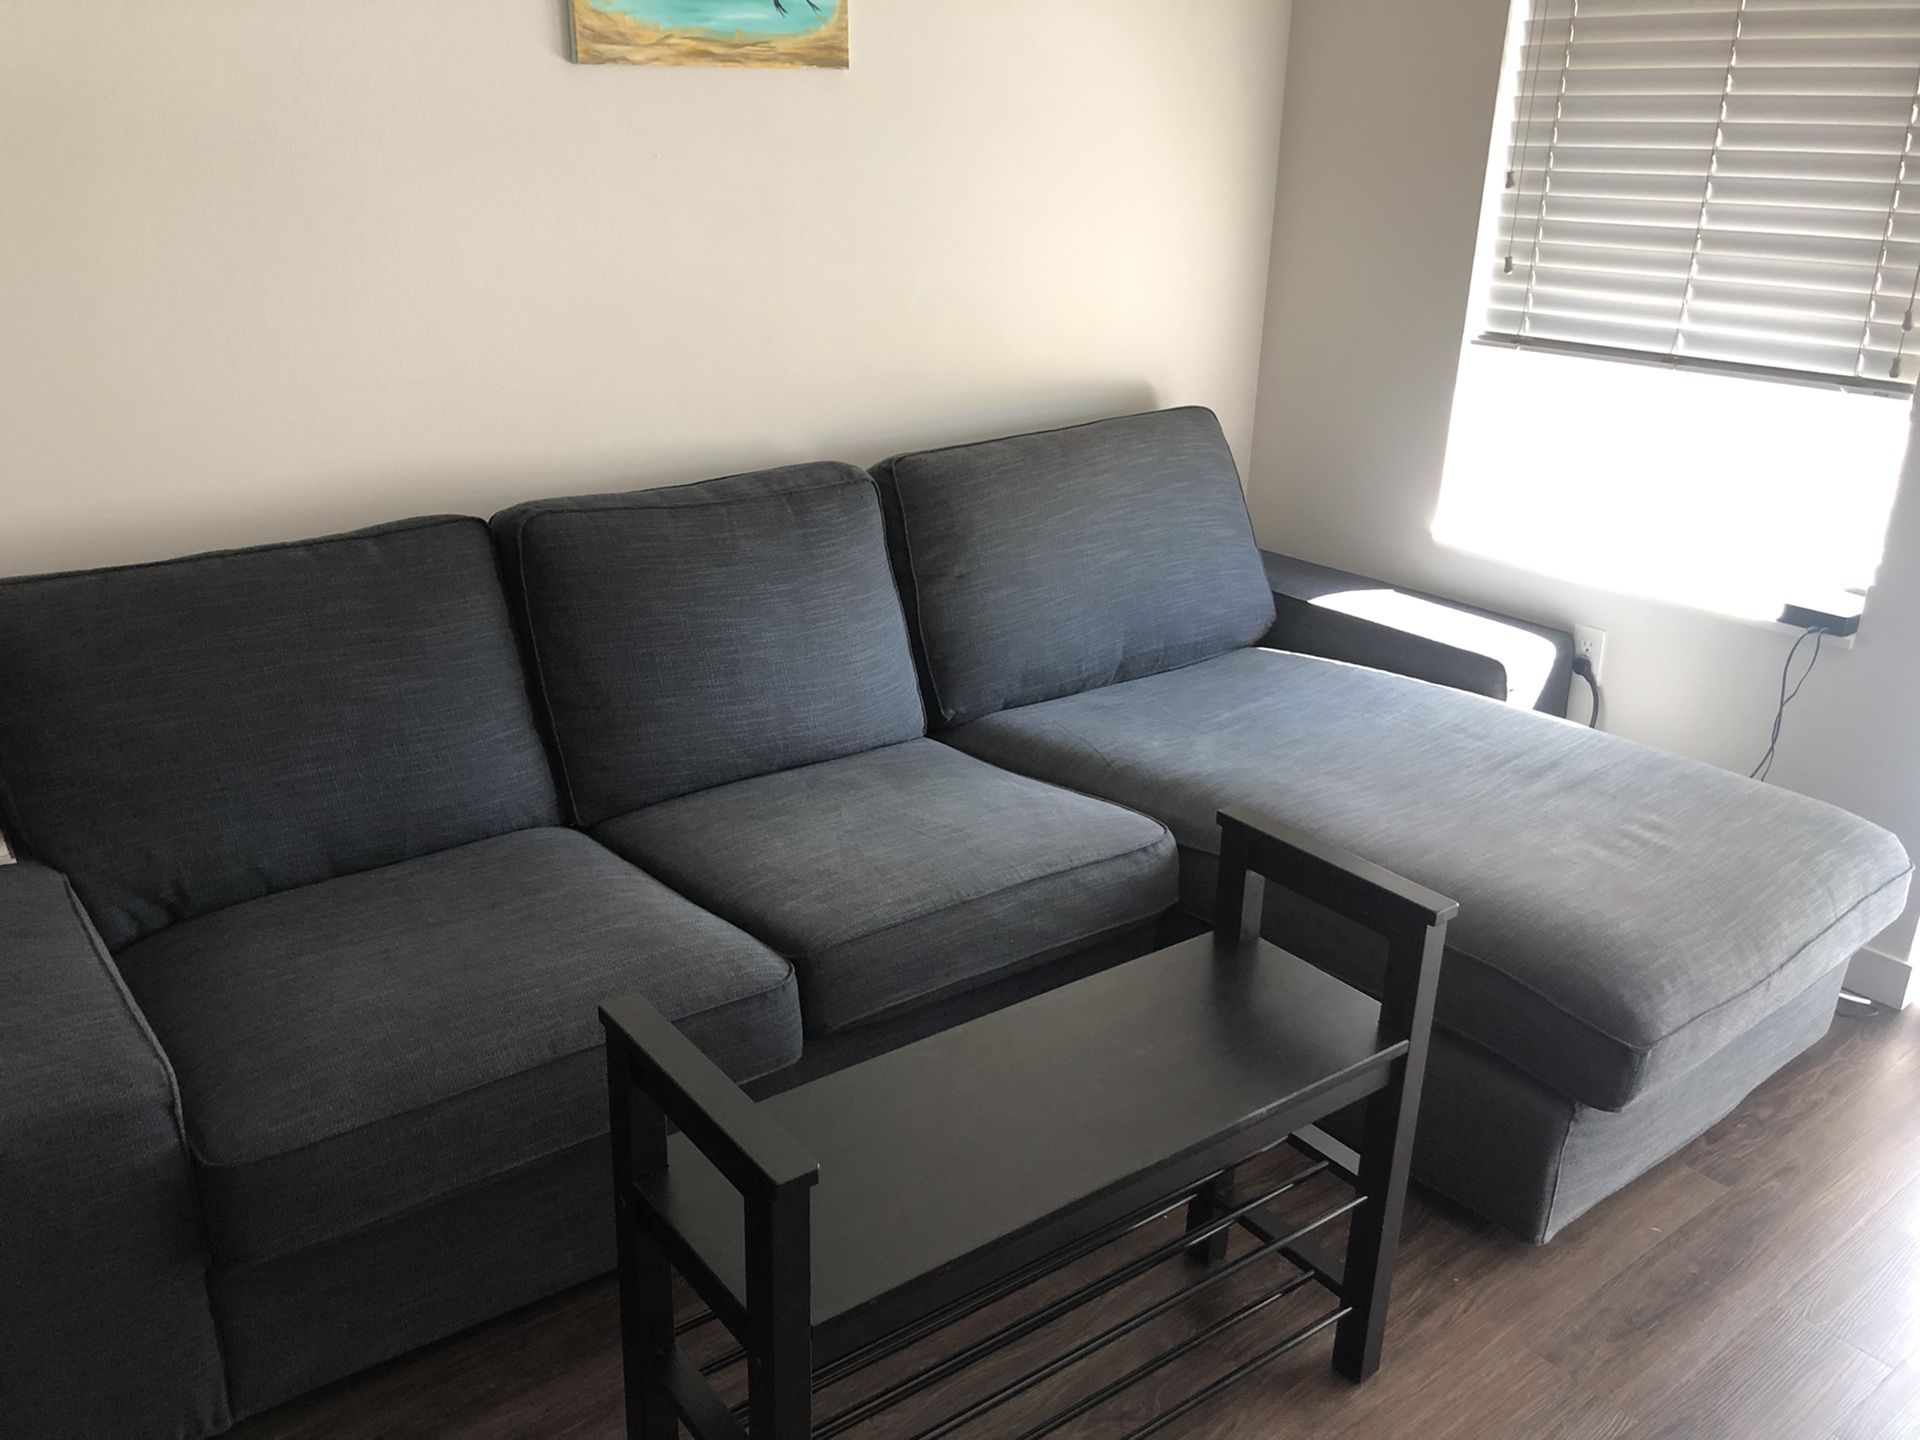 IKEA L-shaped Couch